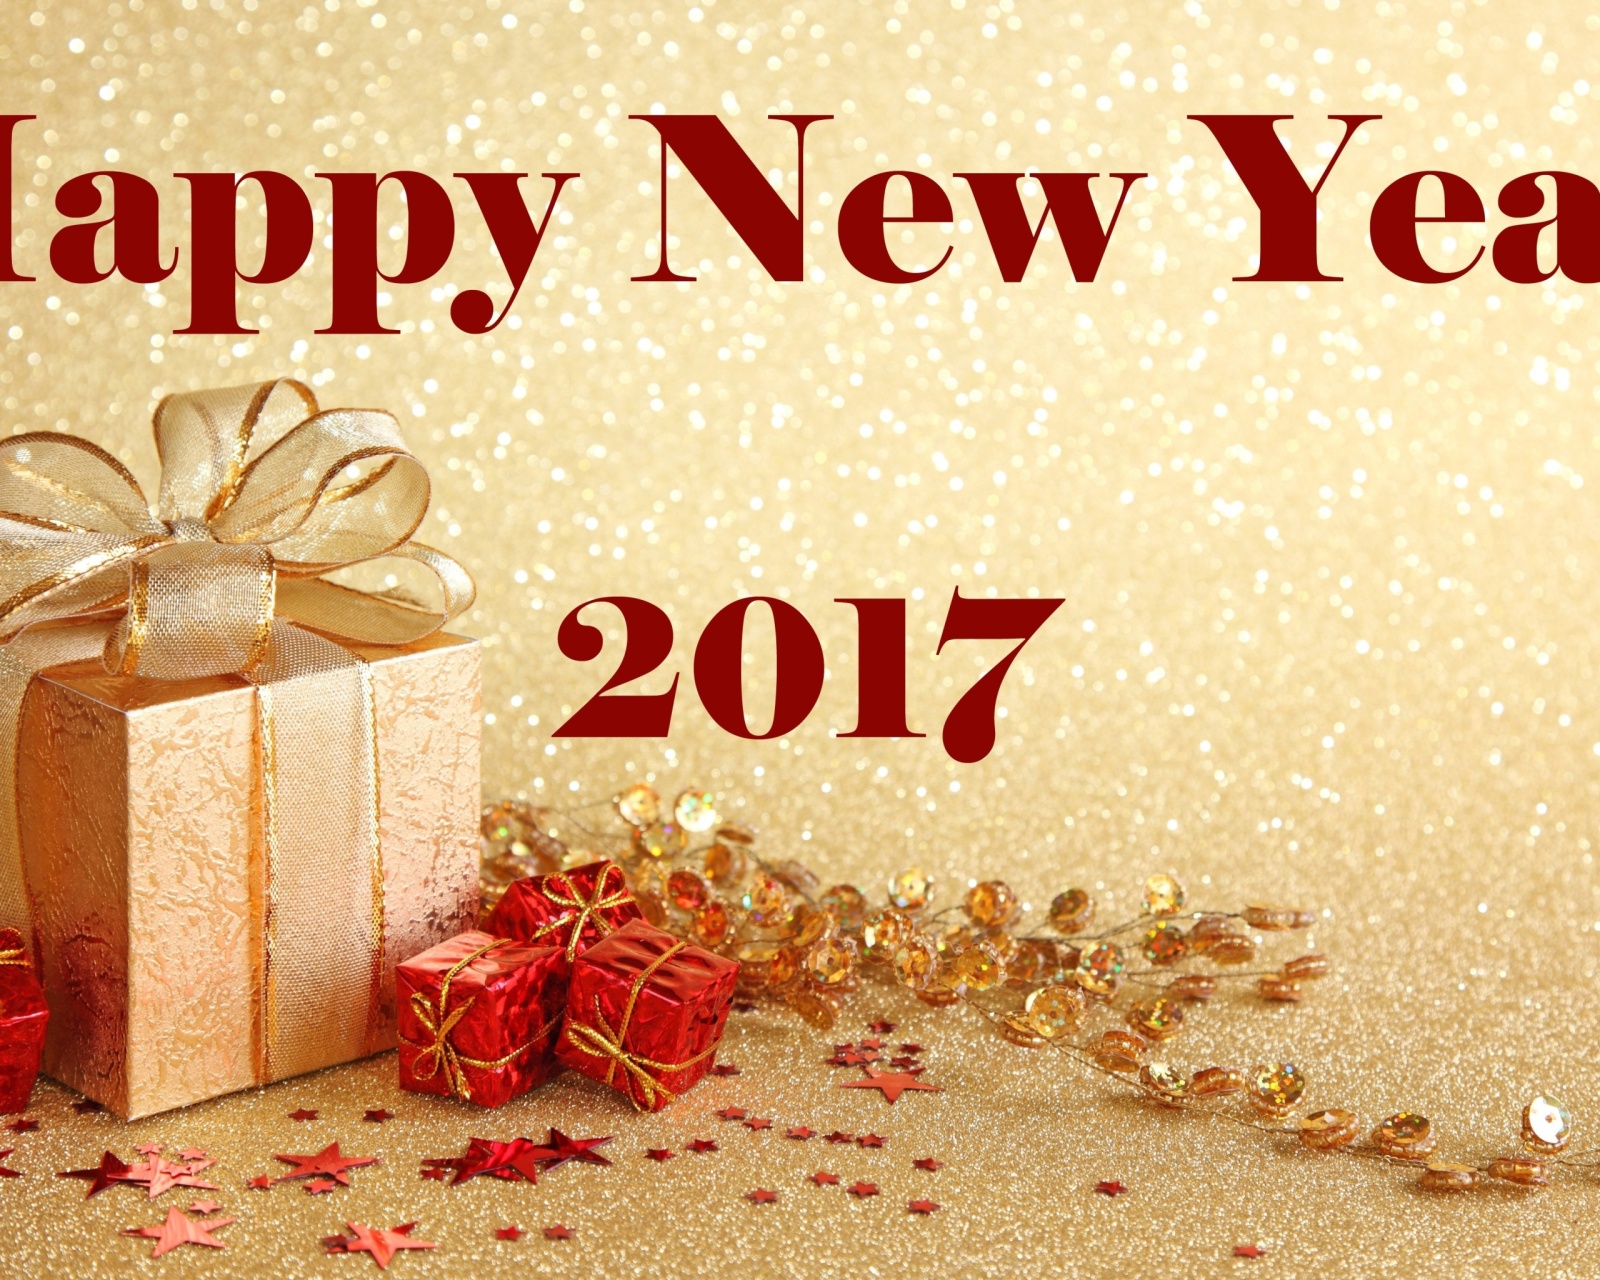 Happy New Year 2017 with Gifts screenshot #1 1600x1280